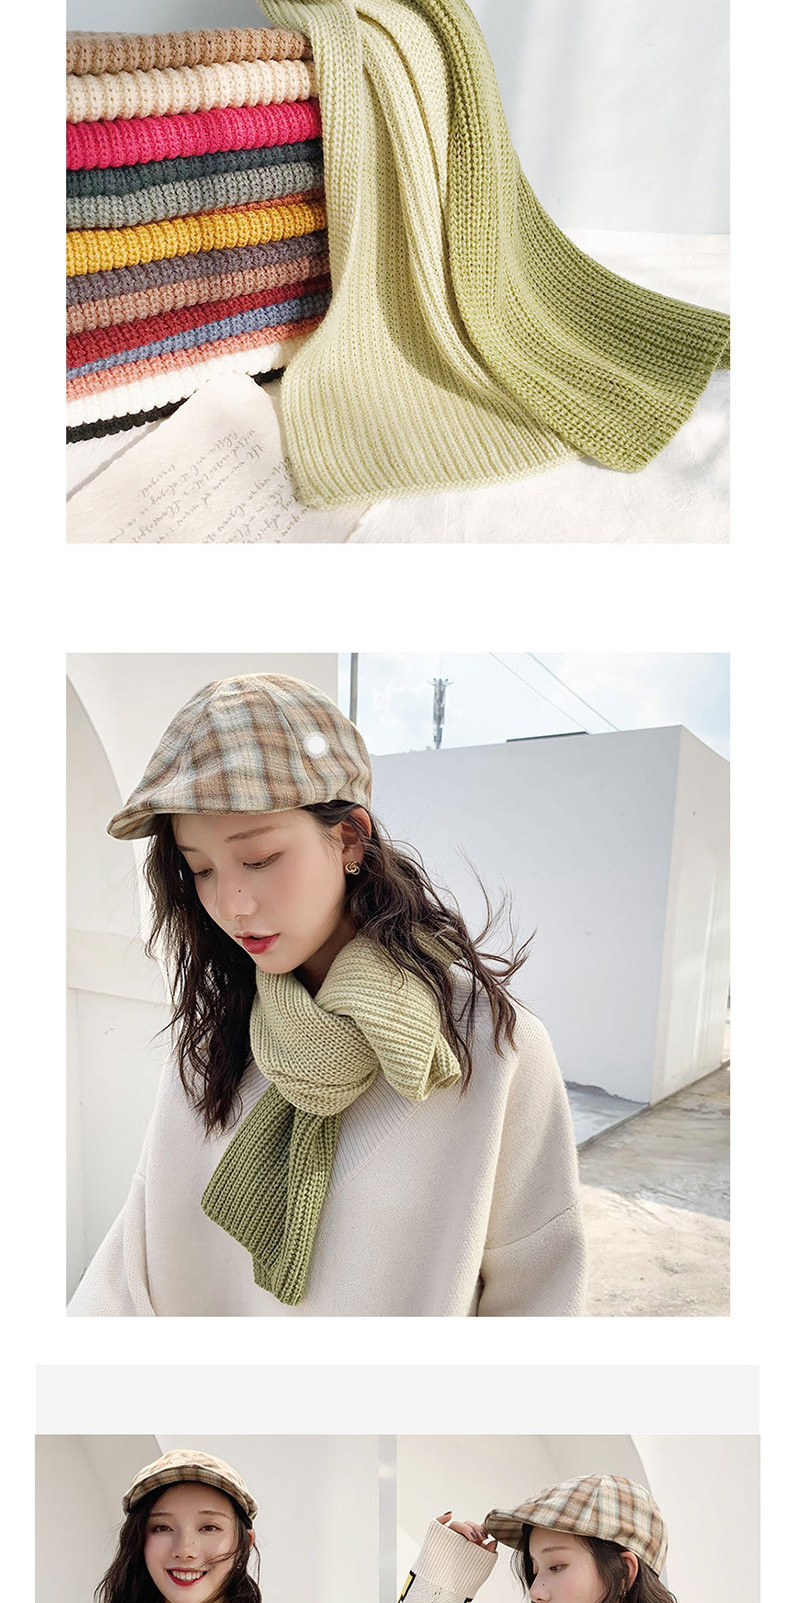 Fashion Two-color Stitching Turmeric + Dark Gray Stitched Two-tone Knit Short Scarf,knitting Wool Scaves